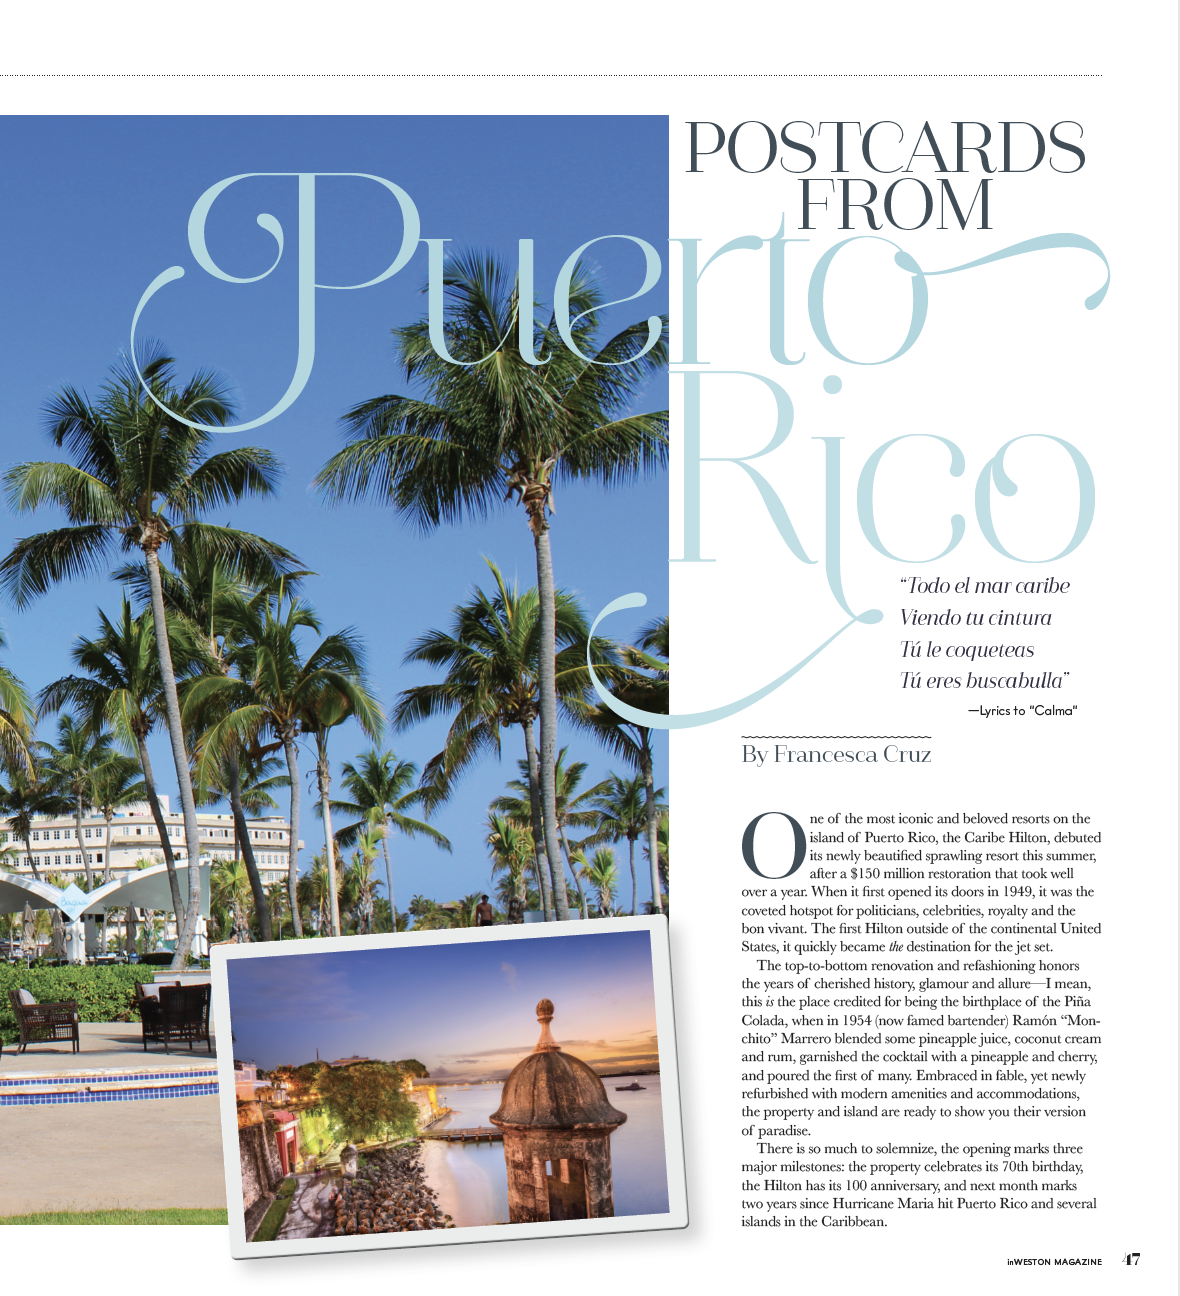 Travel Postcards from Puerto Rico